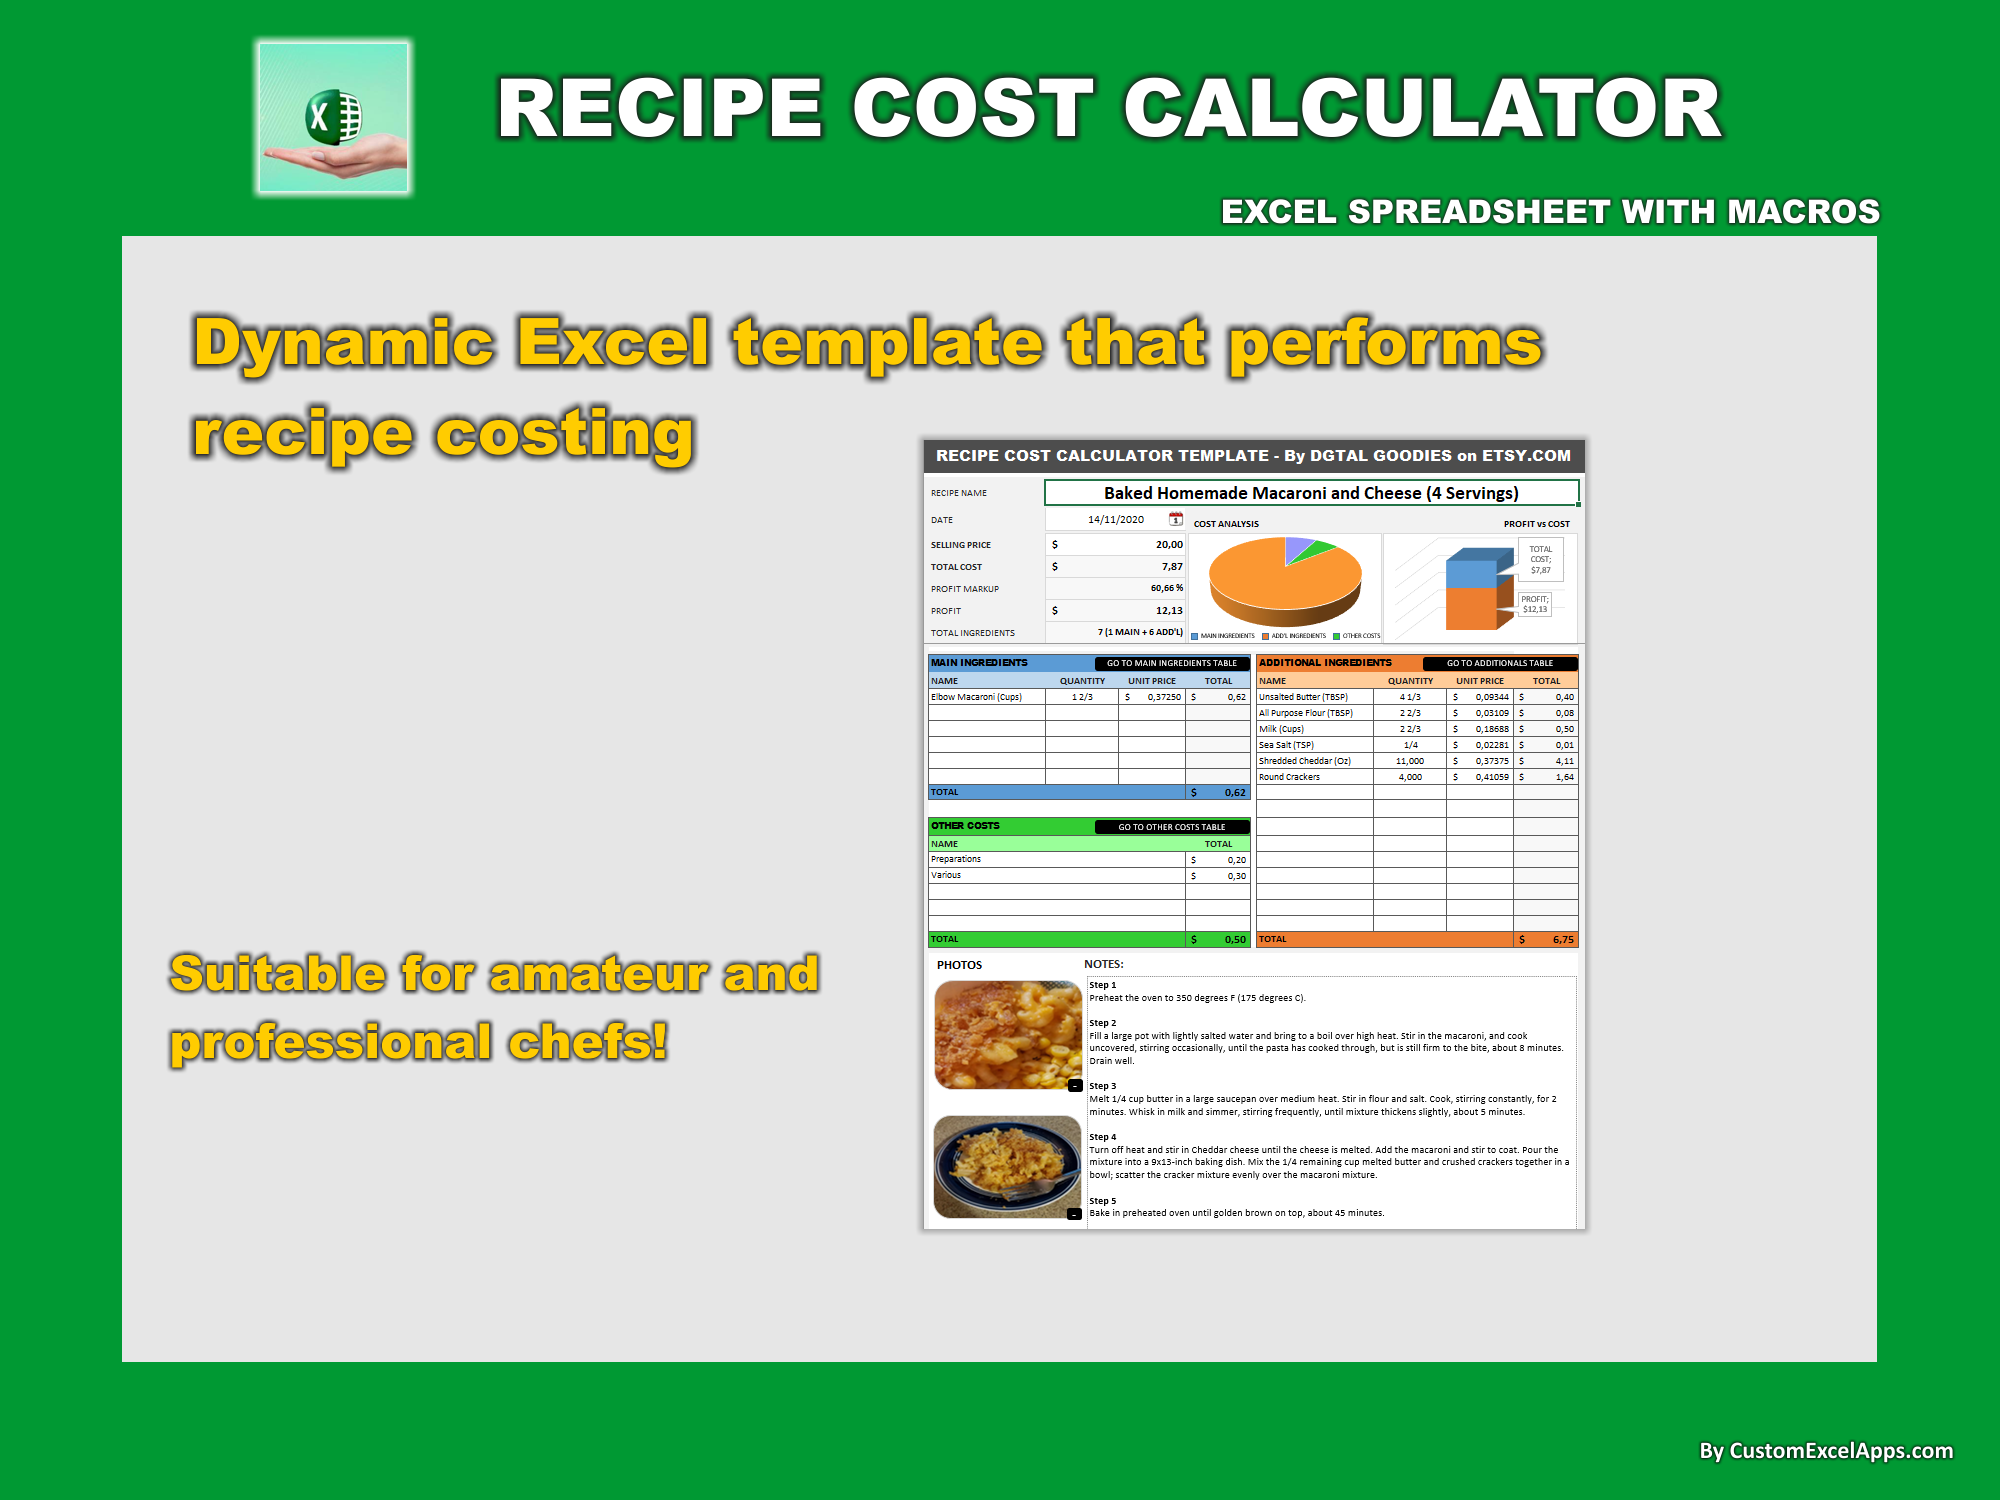 Recipe Costing Excel Spreadsheet - For amateur and professional cooks